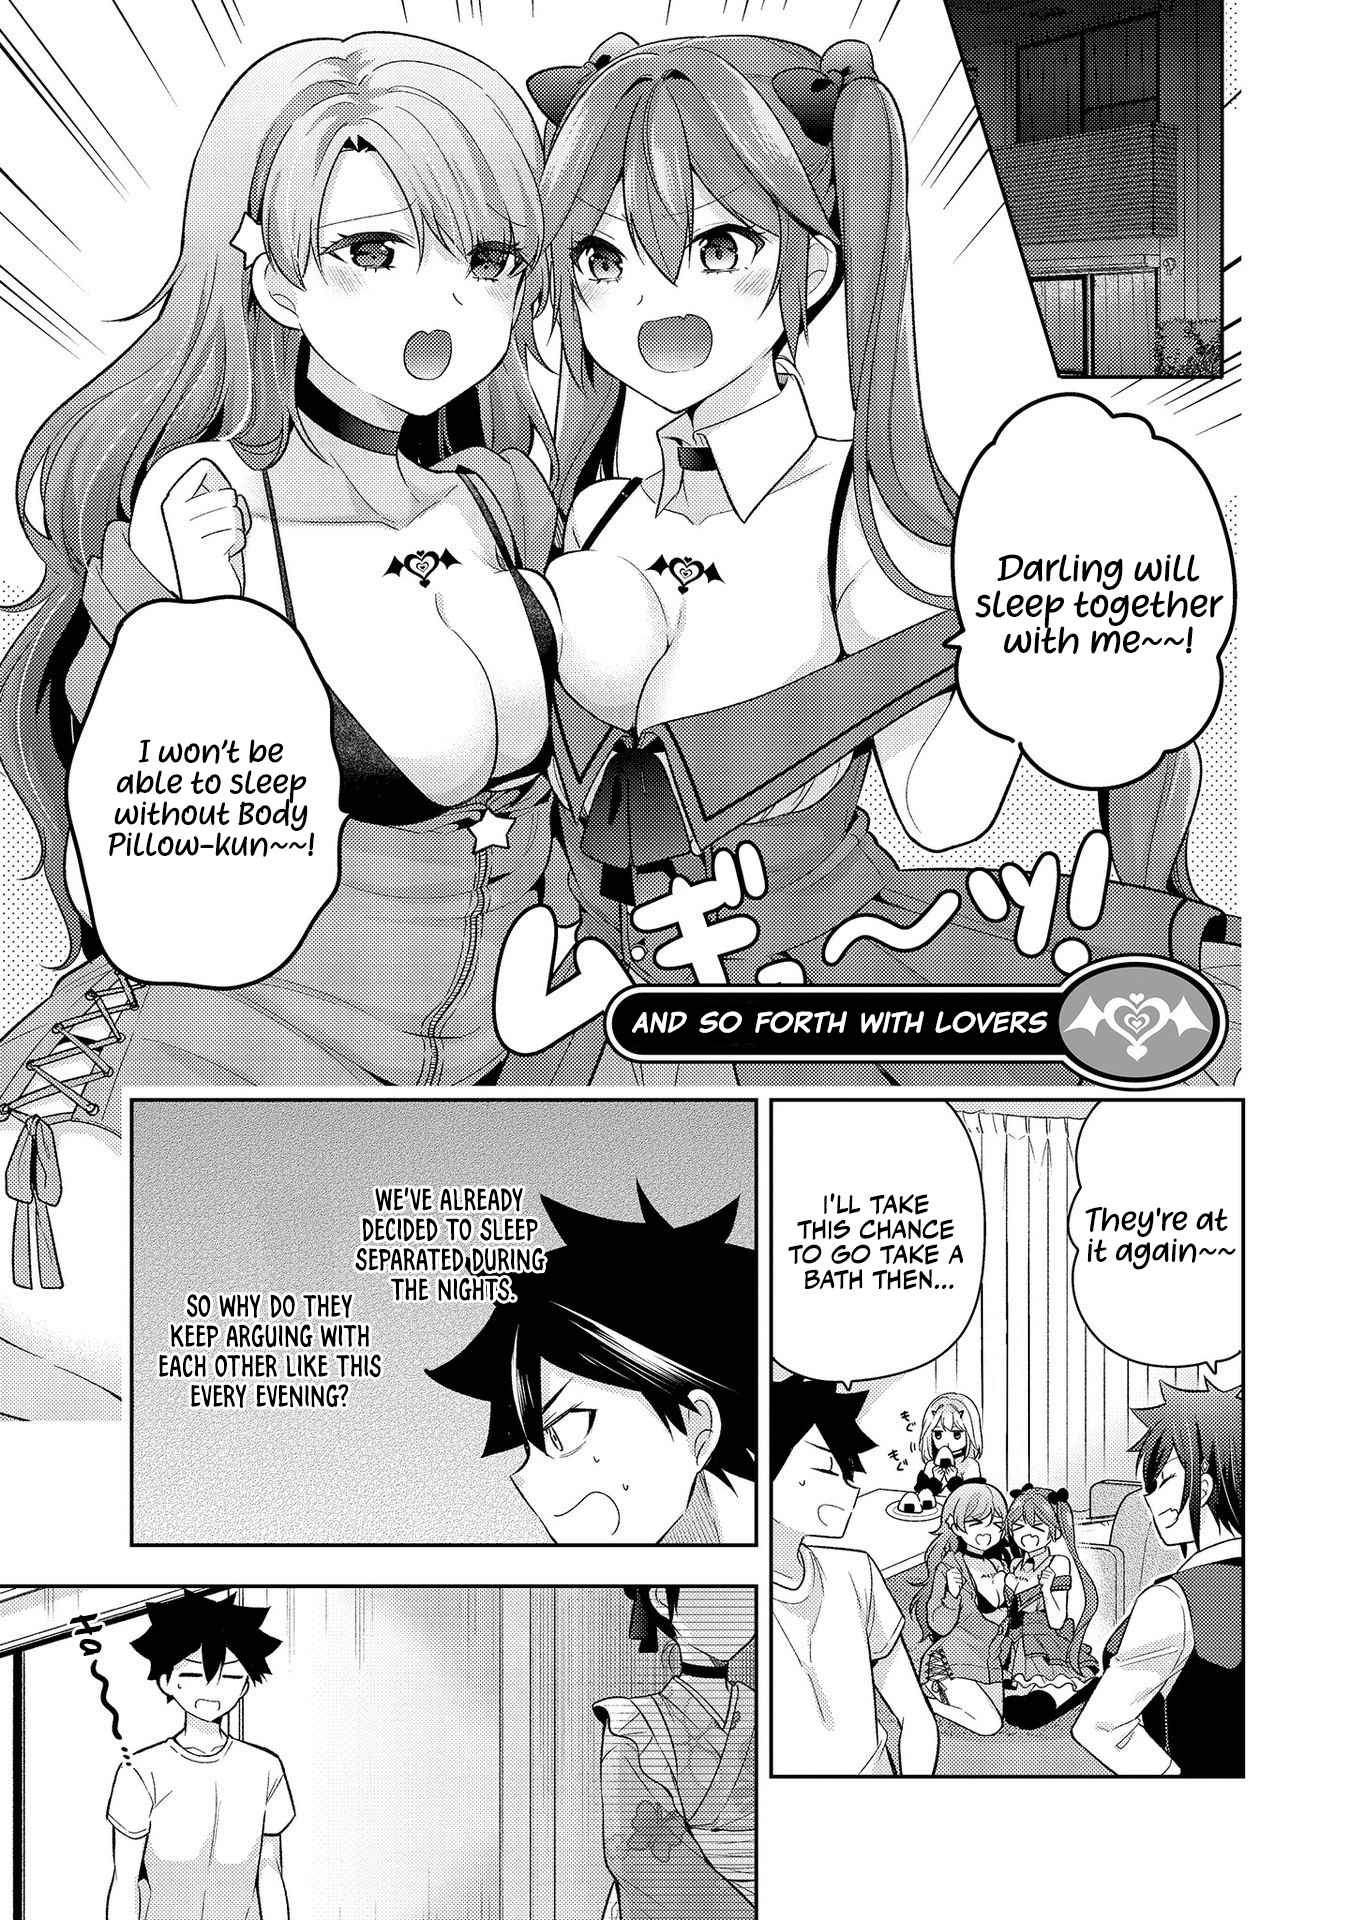 I Summoned Her!? - Page 2